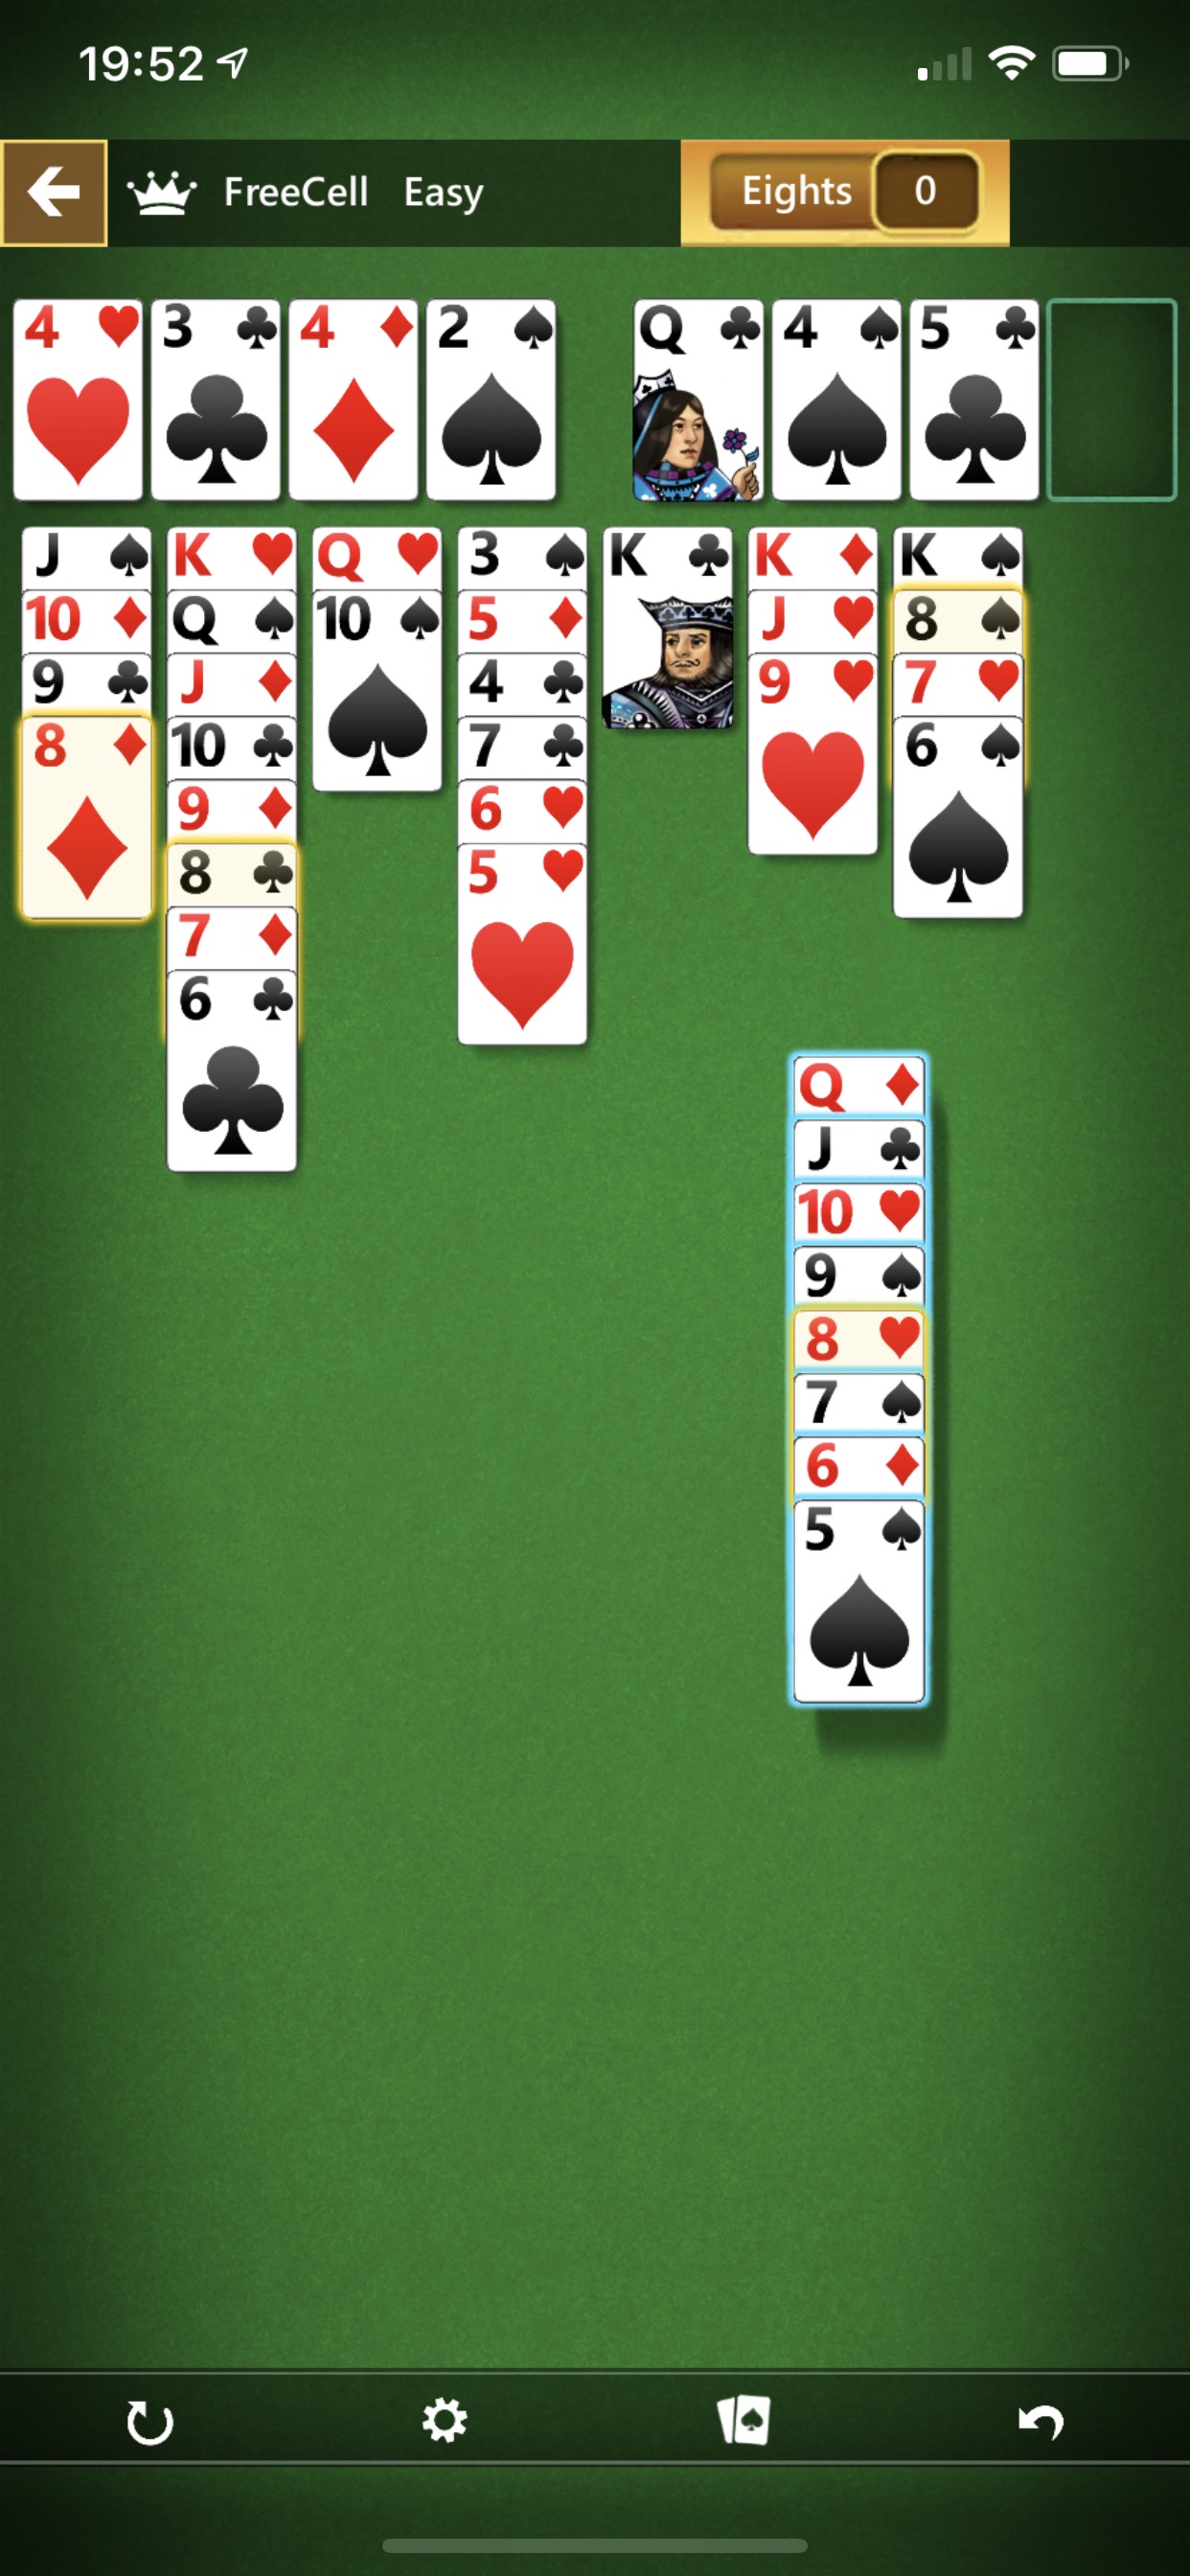 I can't move a stack of cards in FreeCell! – Microsoft Casual Games